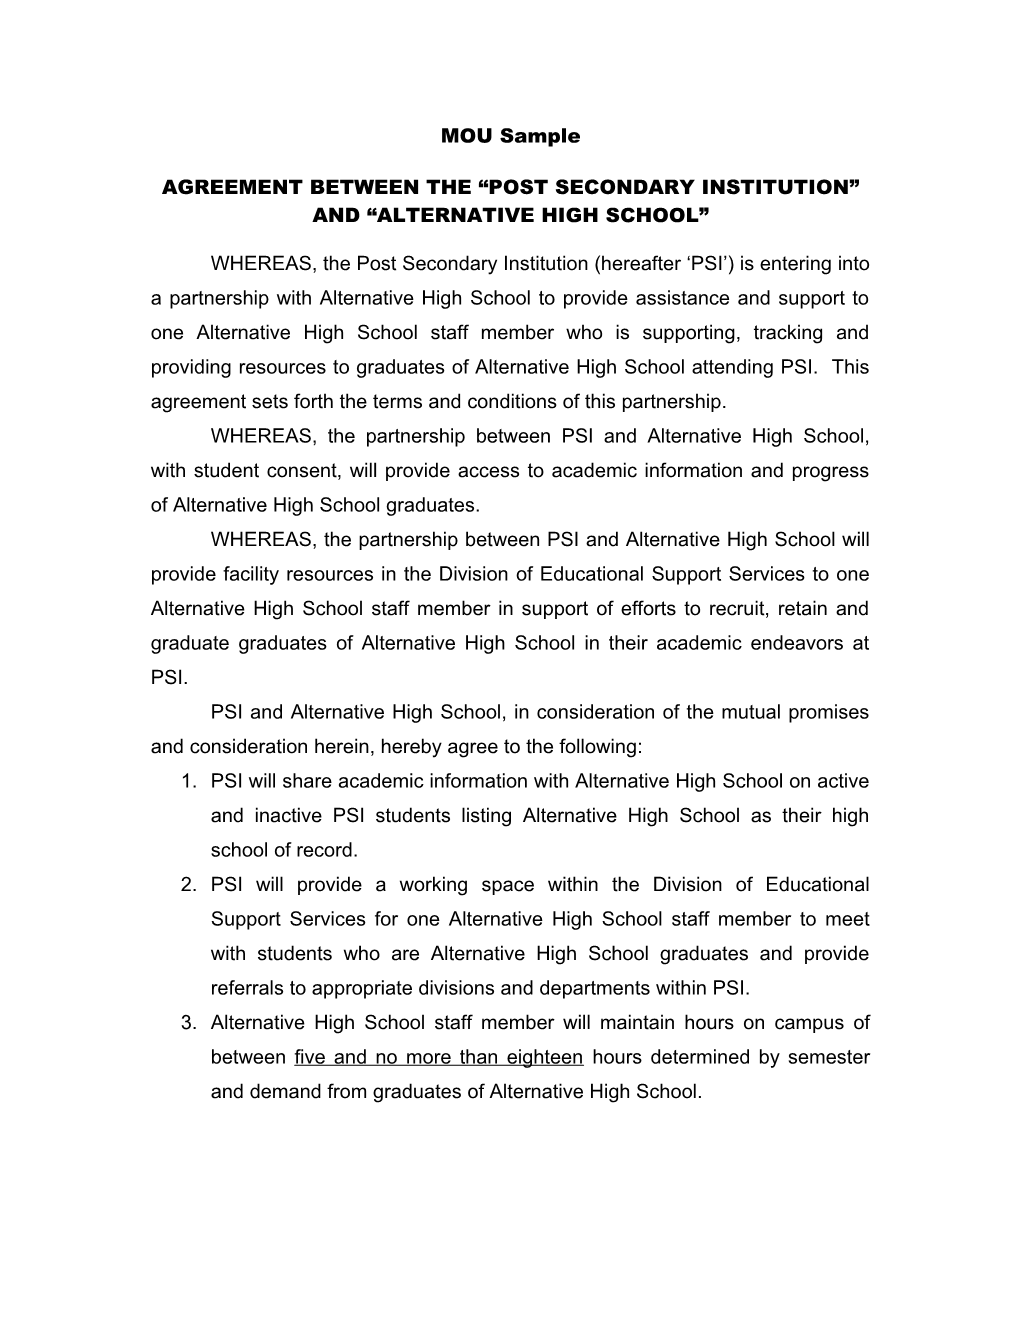 Agreement Between the Post Secondary Institution and Alternative High School